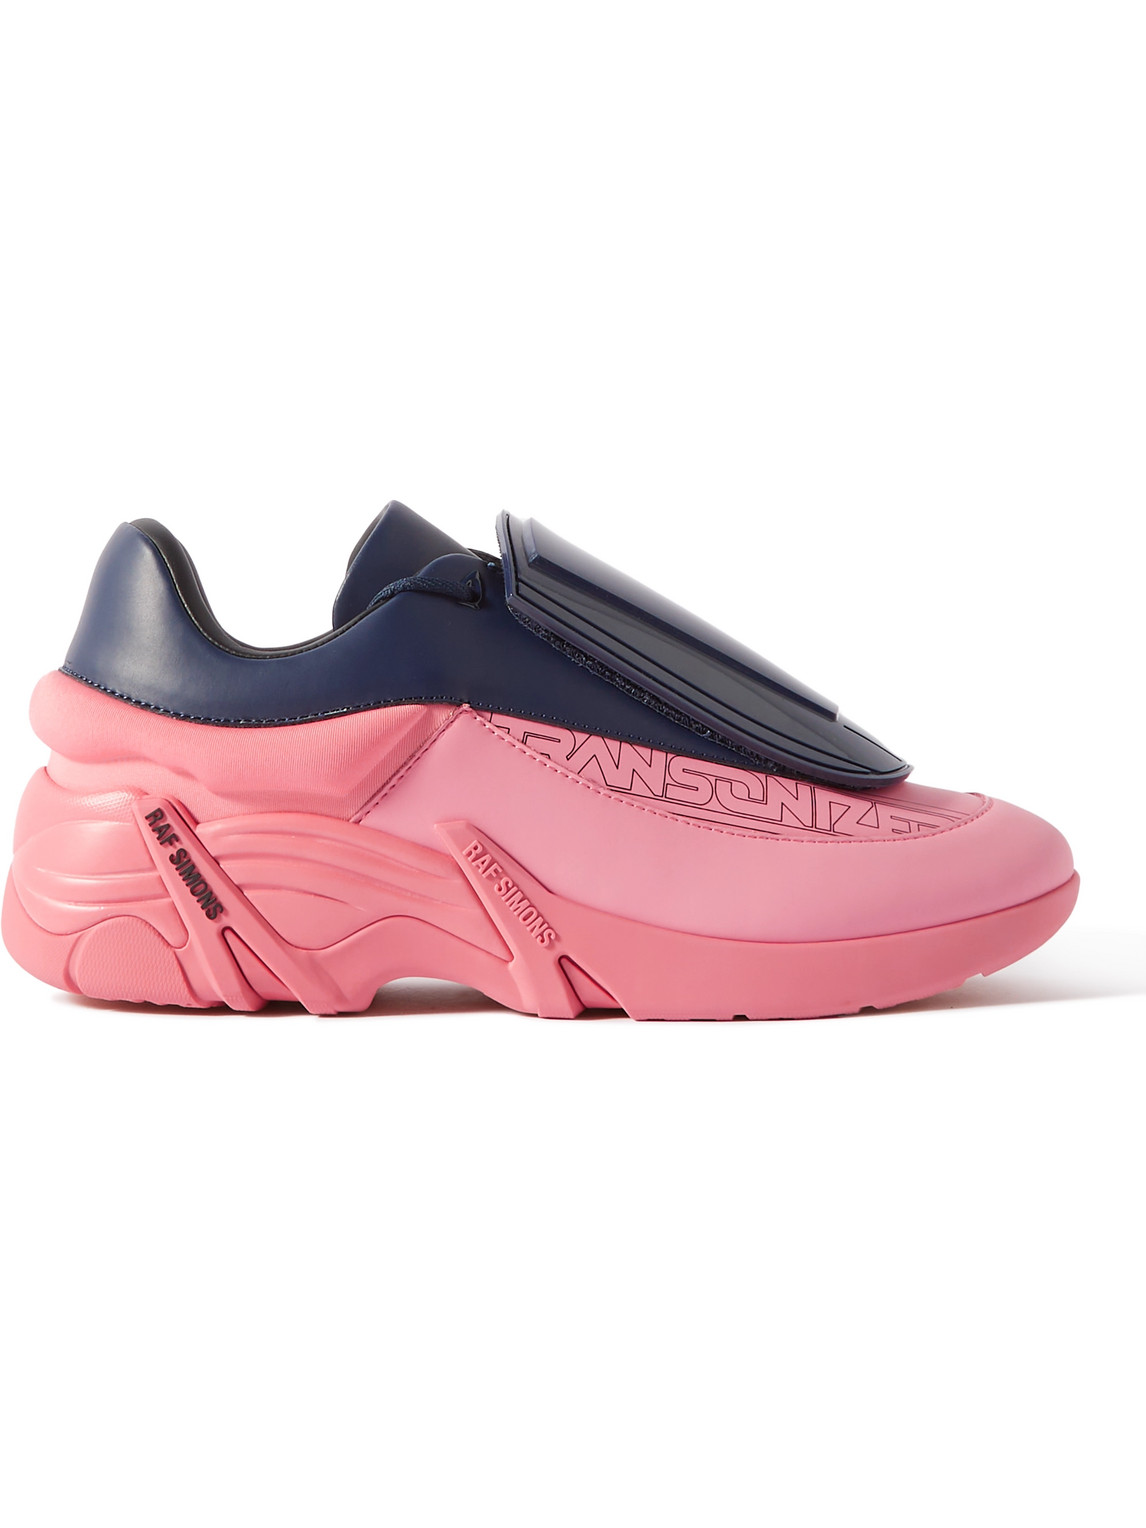 RAF SIMONS ANTEI SHELL AND PVC-TRIMMED LEATHER SNEAKERS